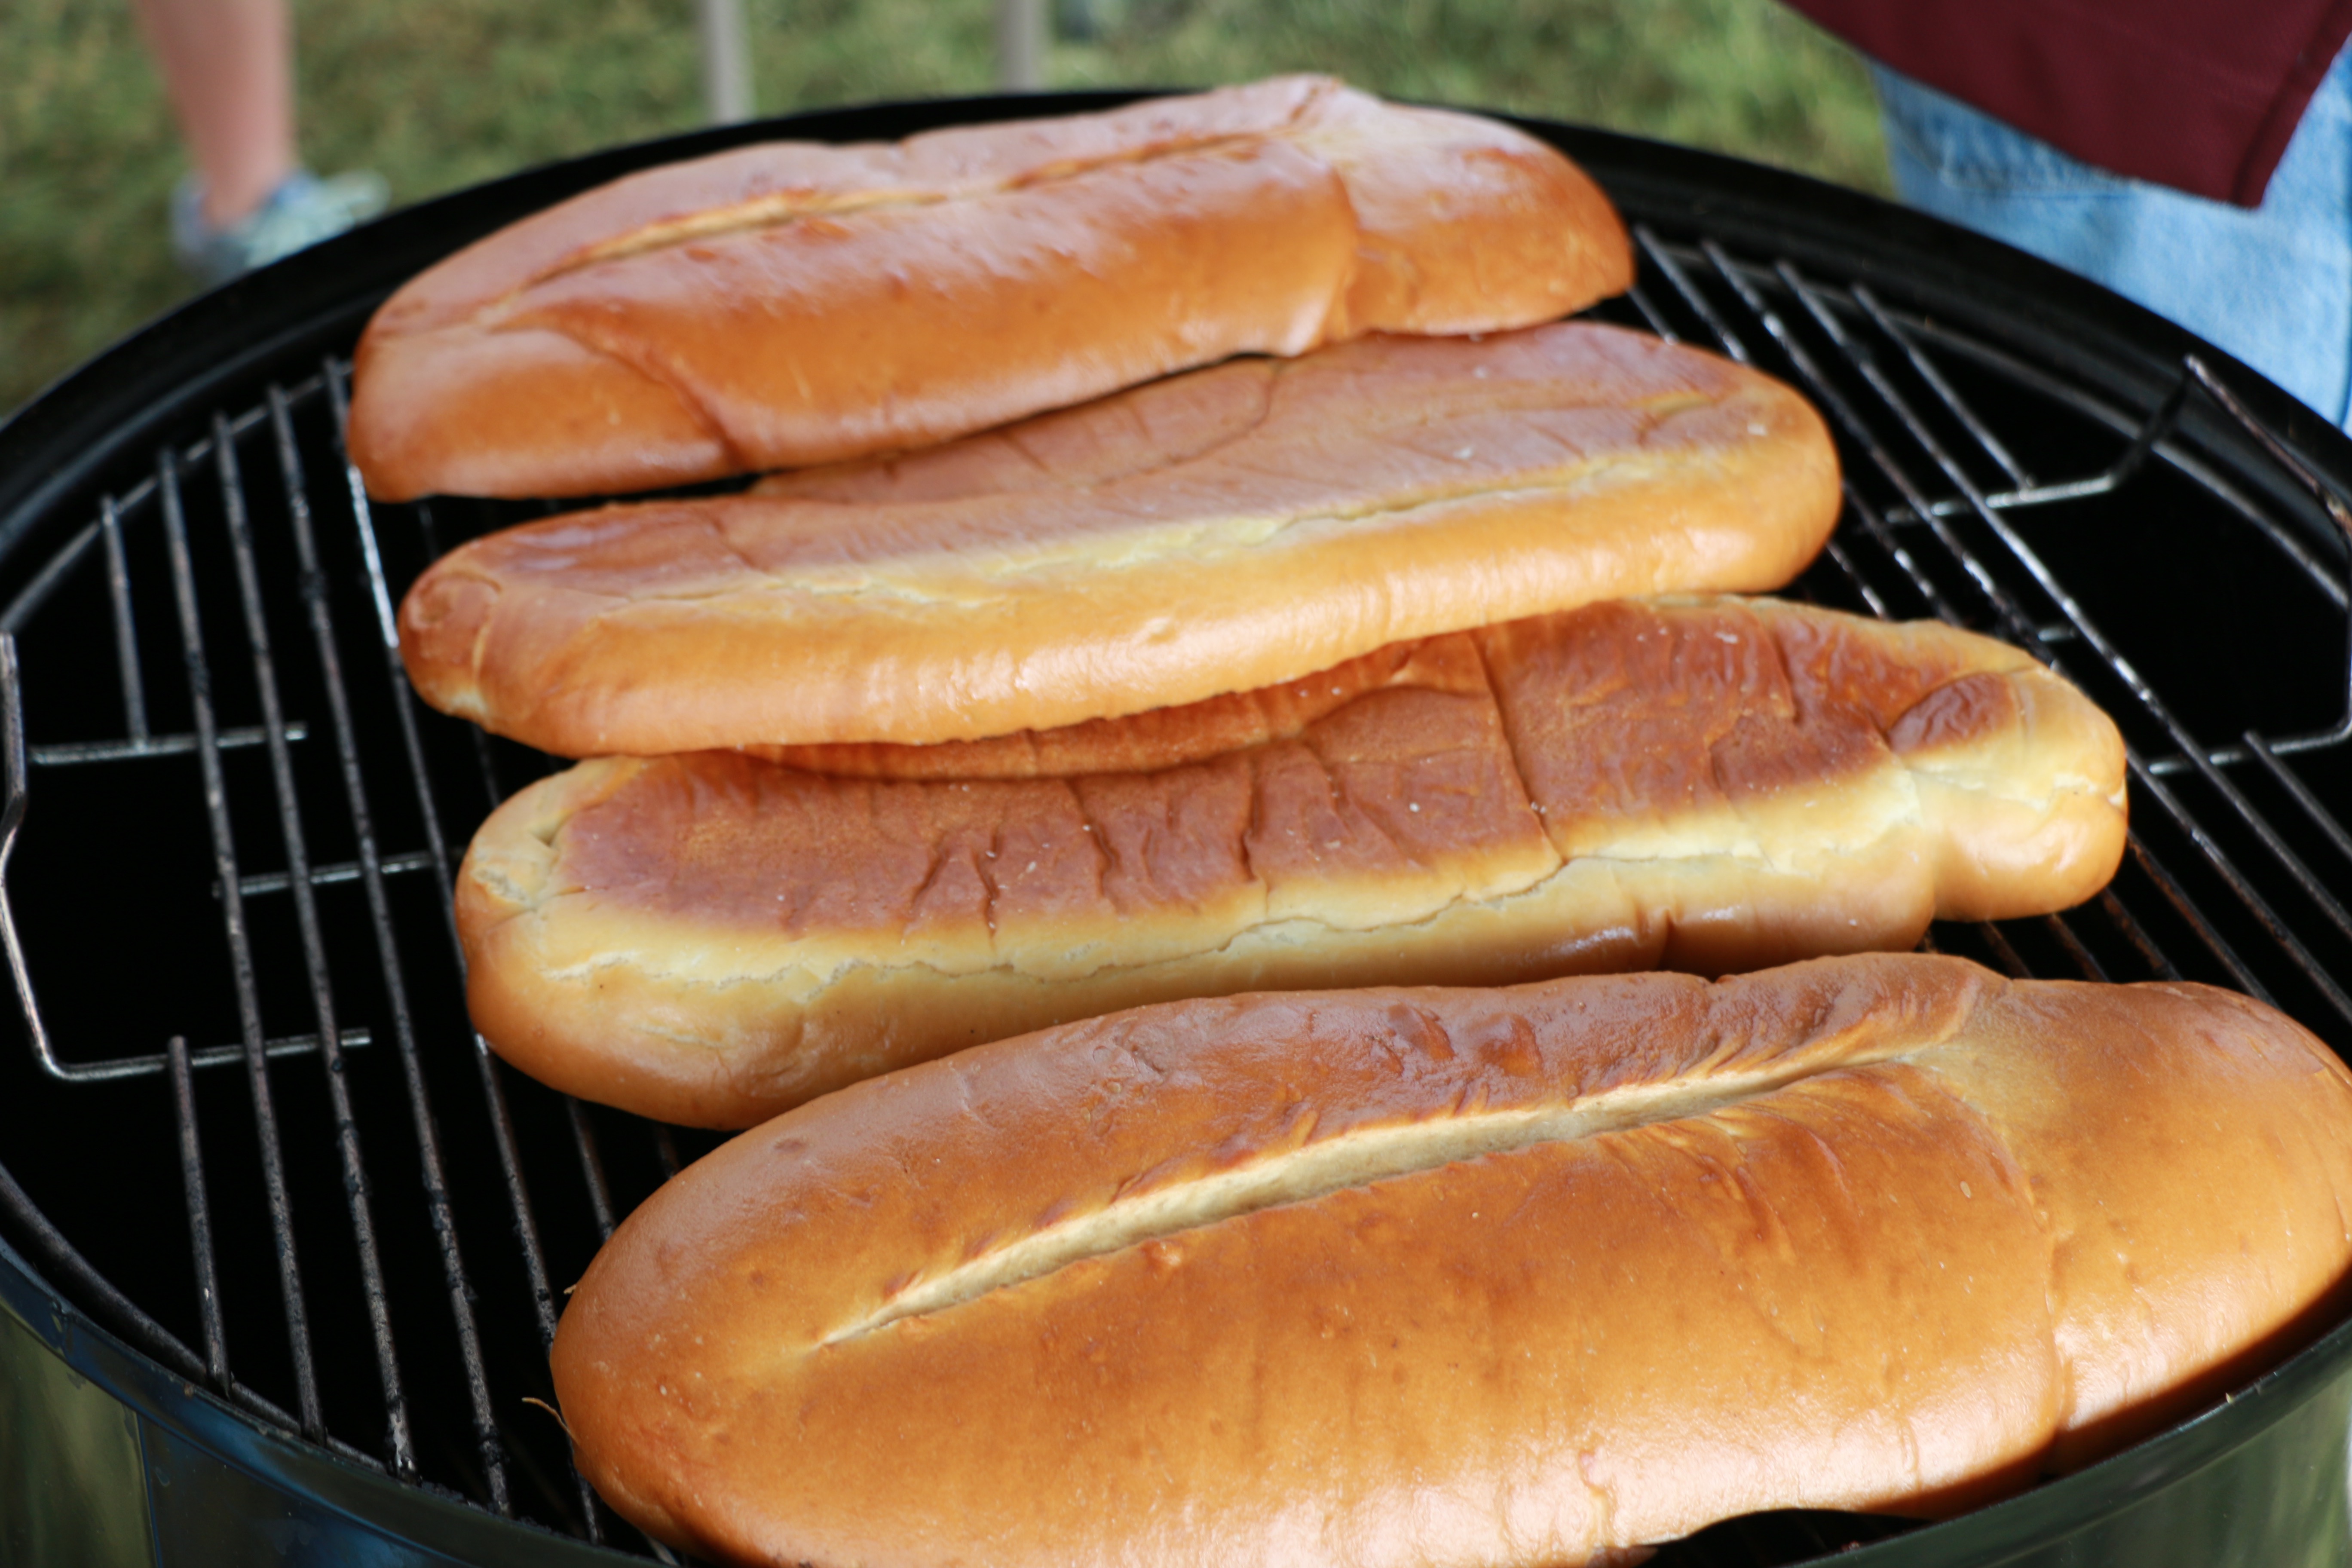 Toasting French bread for tri-tip sandwiches